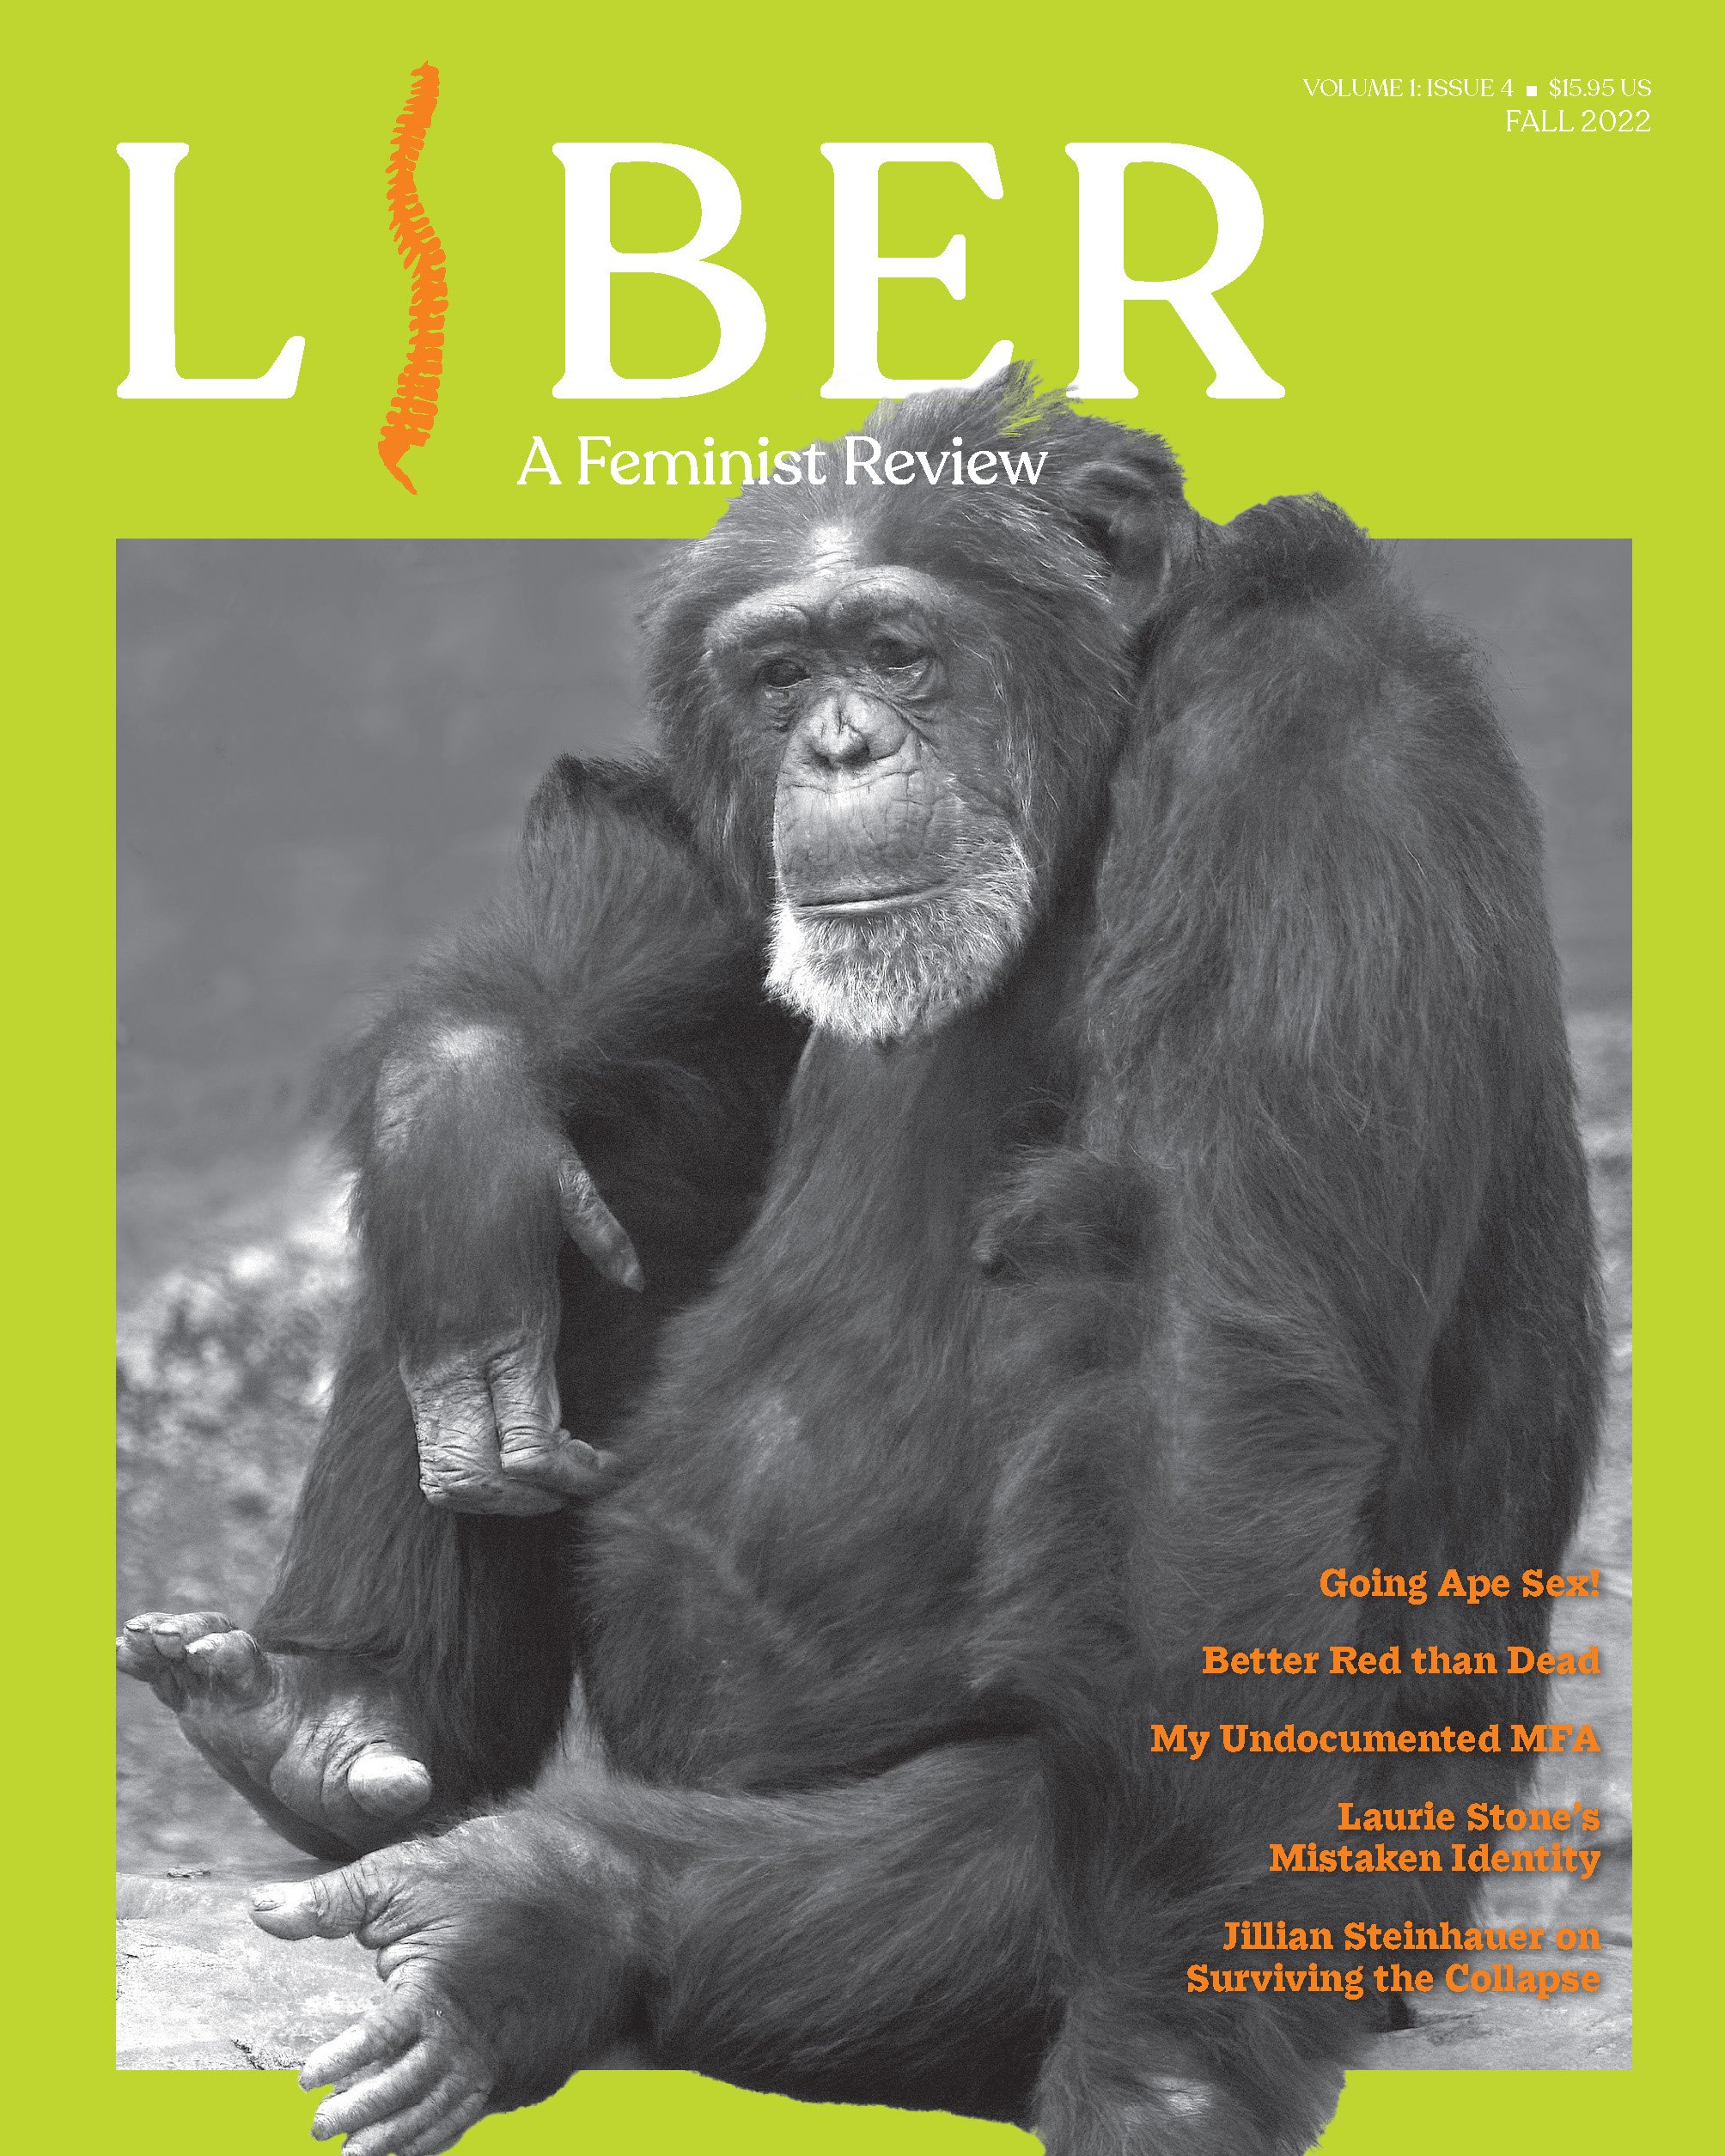 LIBER Volume 1: Issue 4 FALL 2022